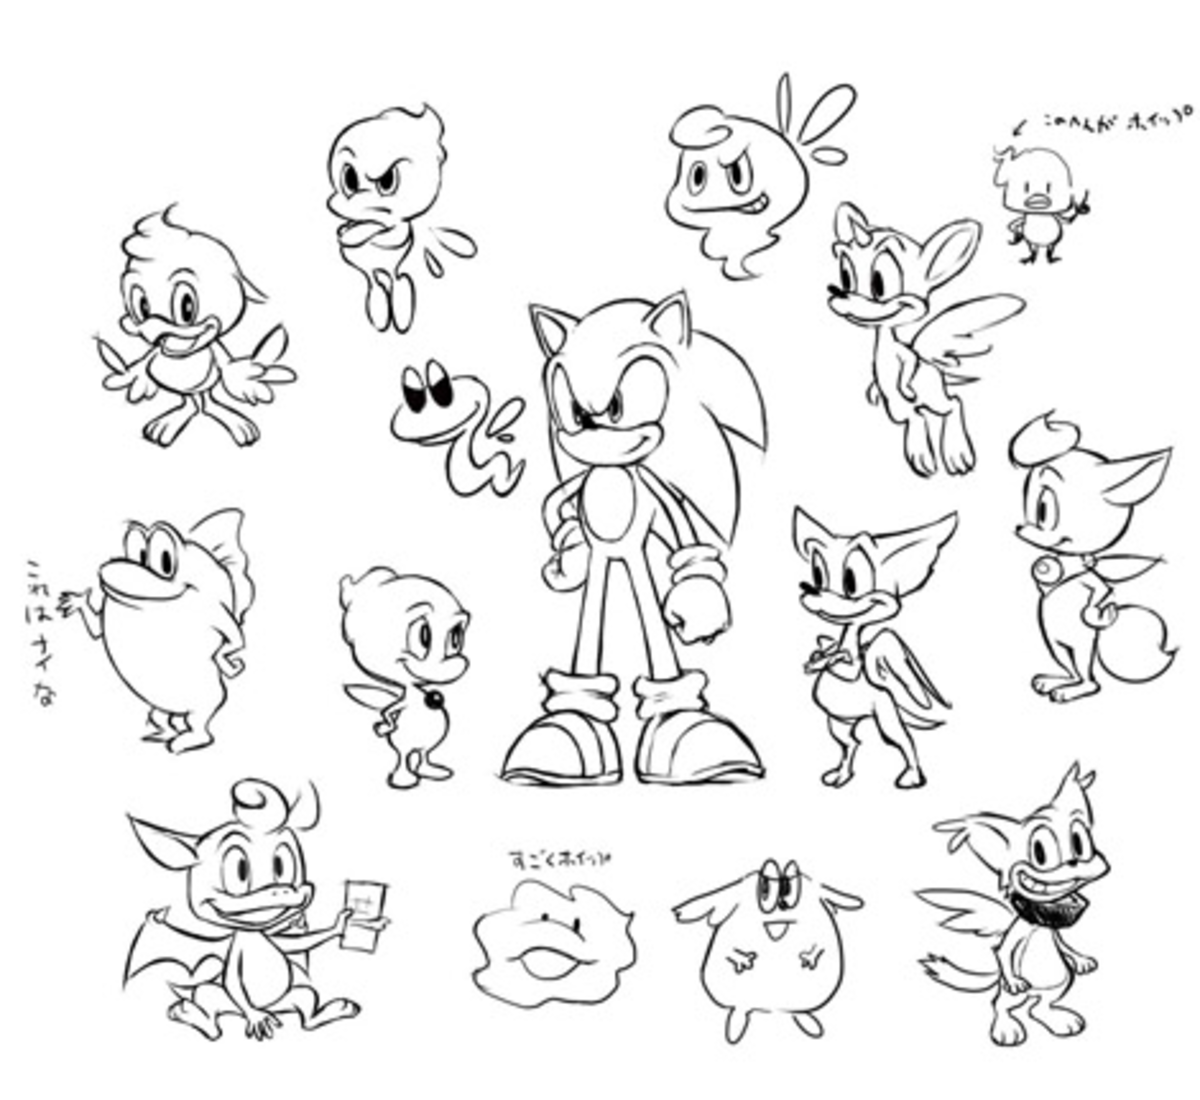 Various early concept designs of "Chip"